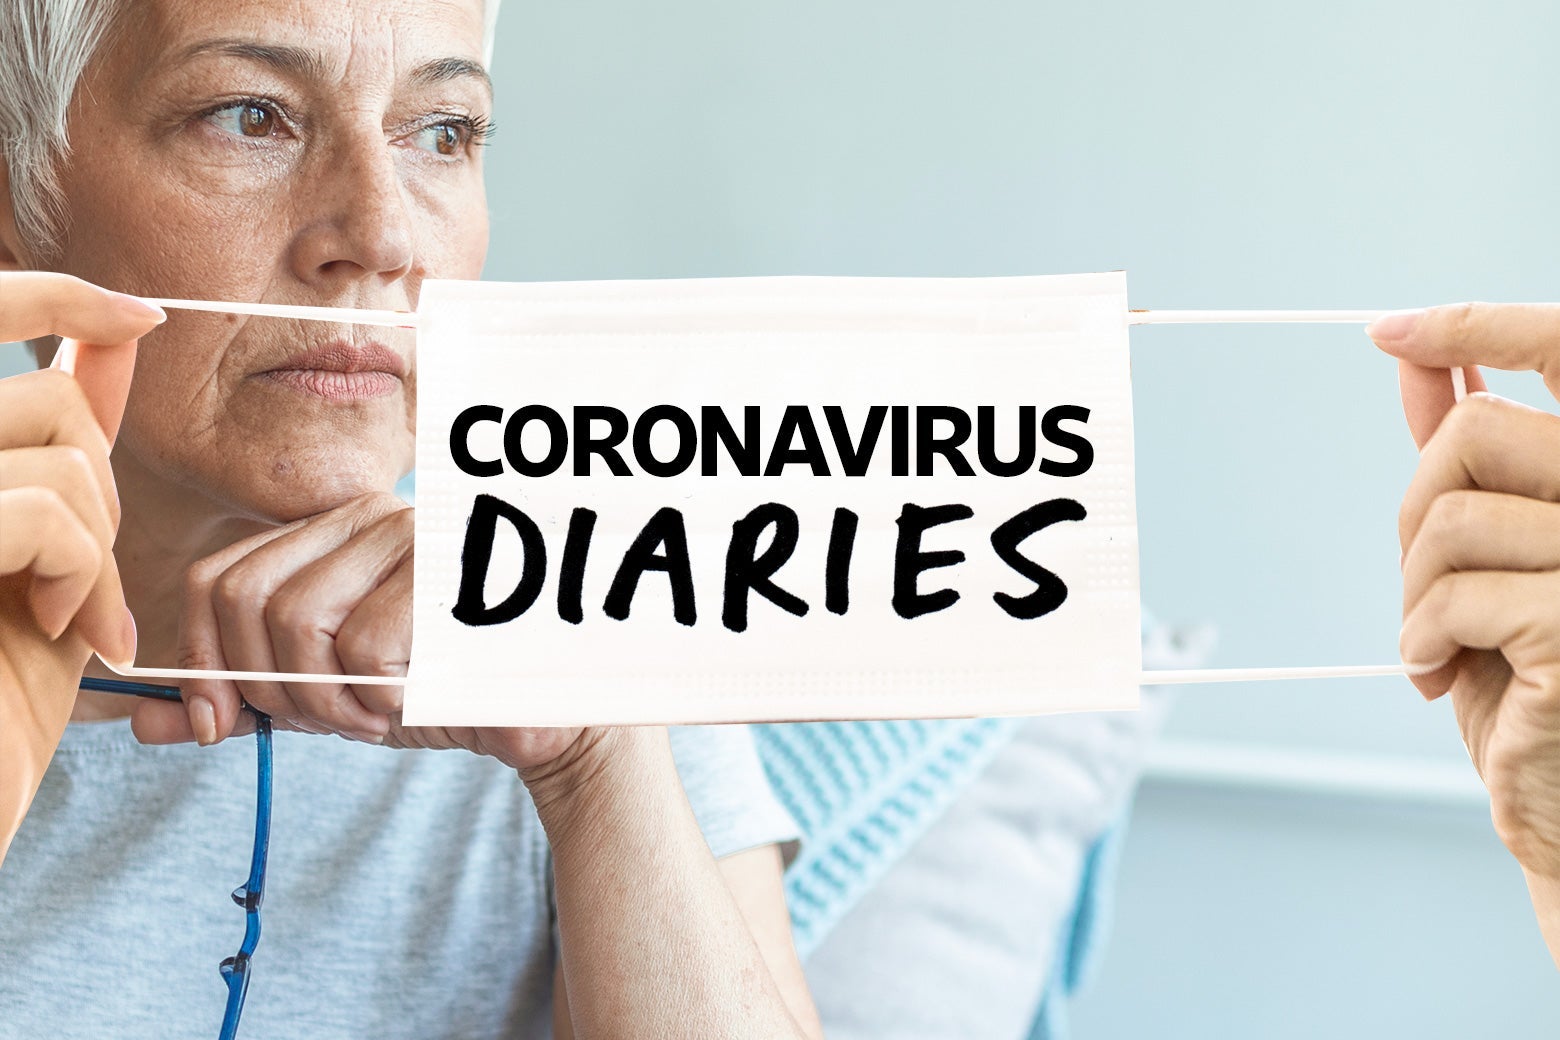 An elderly woman stares off into the distance behind two hands holding a face mask that says "Coronavirus Diaries."